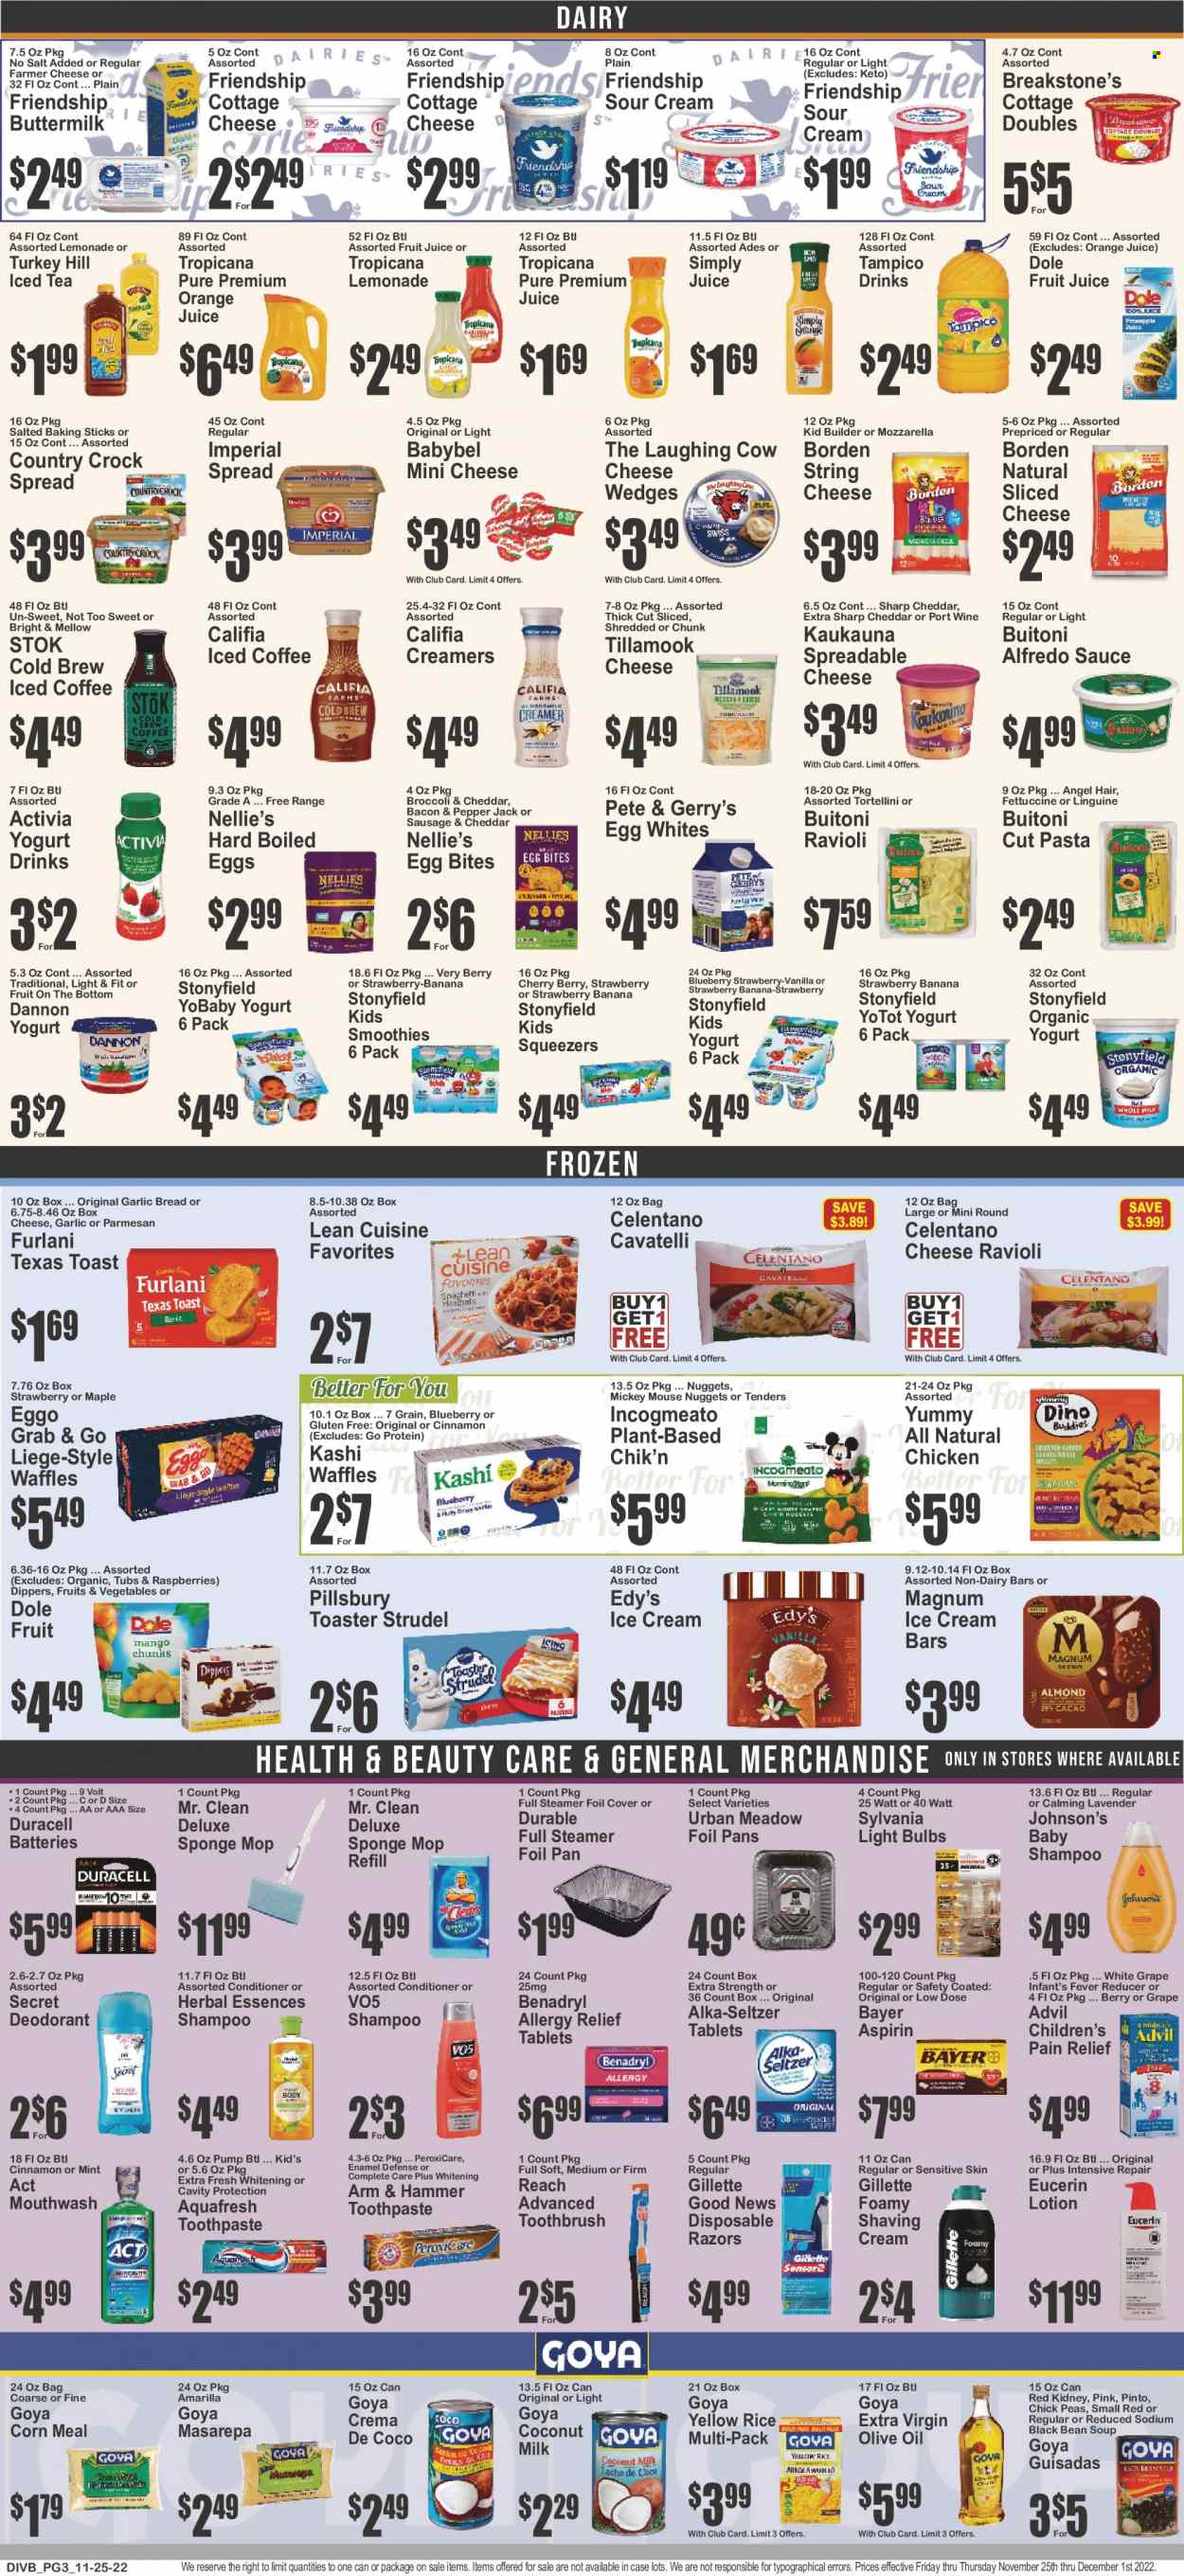 thumbnail - Food Universe Flyer - 11/25/2022 - 12/01/2022 - Sales products - bread, strudel, waffles, broccoli, corn, Dole, cherries, ravioli, soup, nuggets, pasta, sauce, tortellini, Pillsbury, Lean Cuisine, Alfredo sauce, Buitoni, bacon, sausage, cottage cheese, farmer cheese, mozzarella, sliced cheese, string cheese, parmesan, Pepper Jack cheese, The Laughing Cow, Babybel, yoghurt, organic yoghurt, Activia, Dannon, buttermilk, yoghurt drink, eggs, sour cream, ice cream, ice cream bars, Mickey Mouse, ARM & HAMMER, coconut milk, Goya, rice, cinnamon, extra virgin olive oil, olive oil, oil, lemonade, orange juice, juice, fruit juice, ice tea, fruit punch, smoothie, iced coffee, port wine, Johnson's, shampoo, toothbrush, toothpaste, mouthwash, conditioner, Herbal Essences, VO5, body lotion, Eucerin, anti-perspirant, deodorant, Gillette, disposable razor, mop pad, pan, battery, bulb, Duracell, light bulb, Sylvania, pain relief, Advil Rapid, Alka-seltzer, Low Dose, aspirin, Bayer, allergy relief. Page 4.